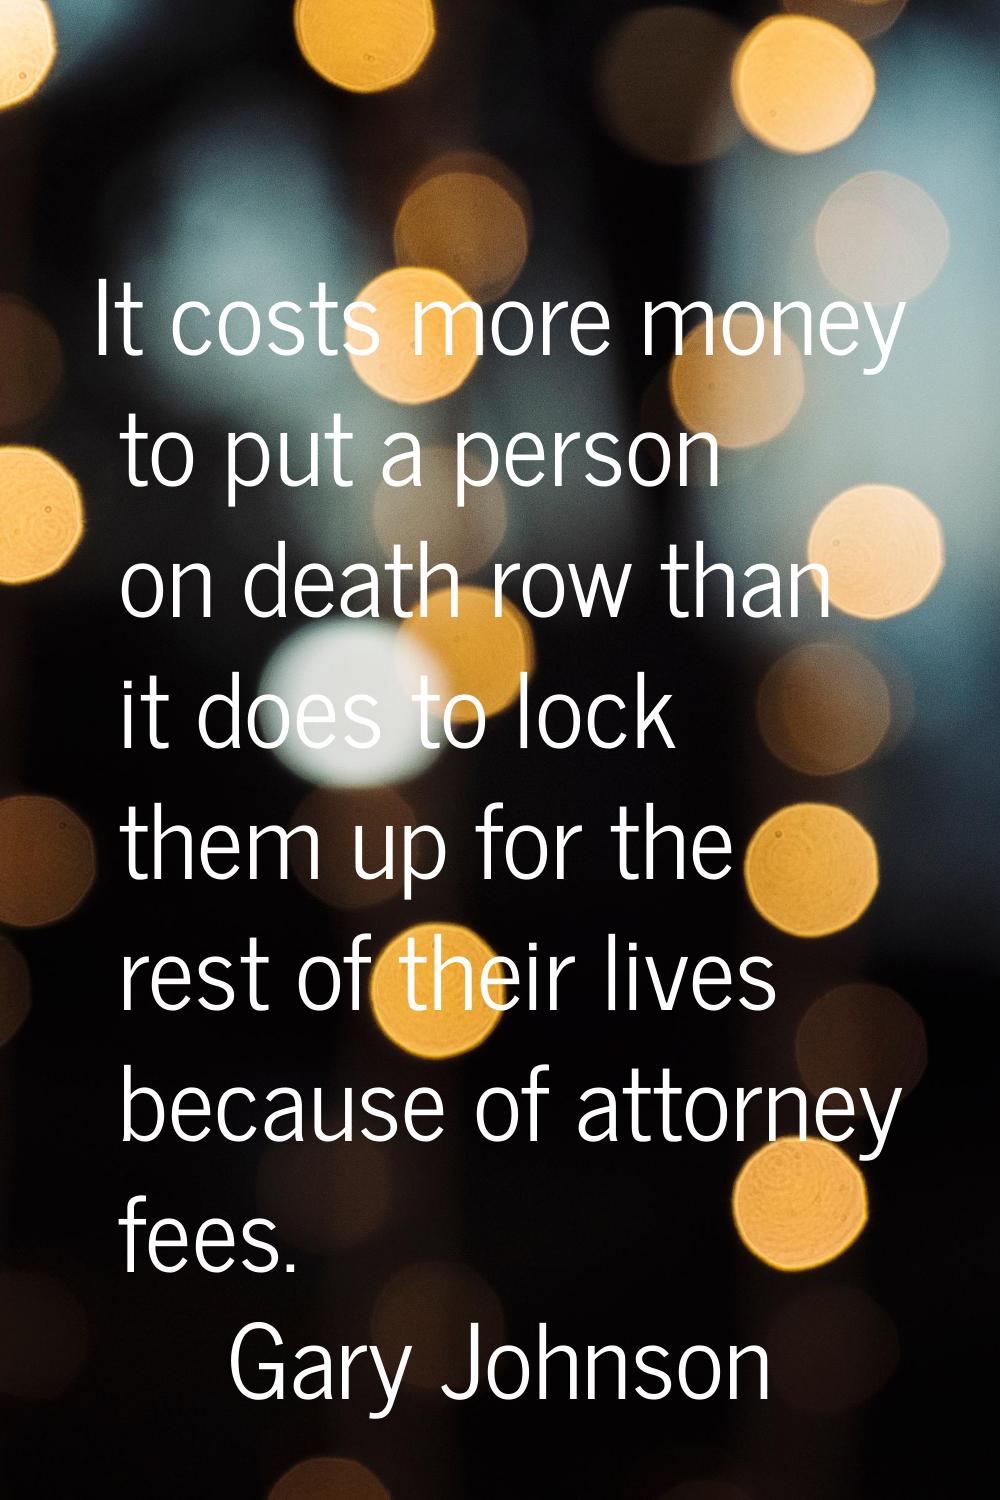 It costs more money to put a person on death row than it does to lock them up for the rest of their